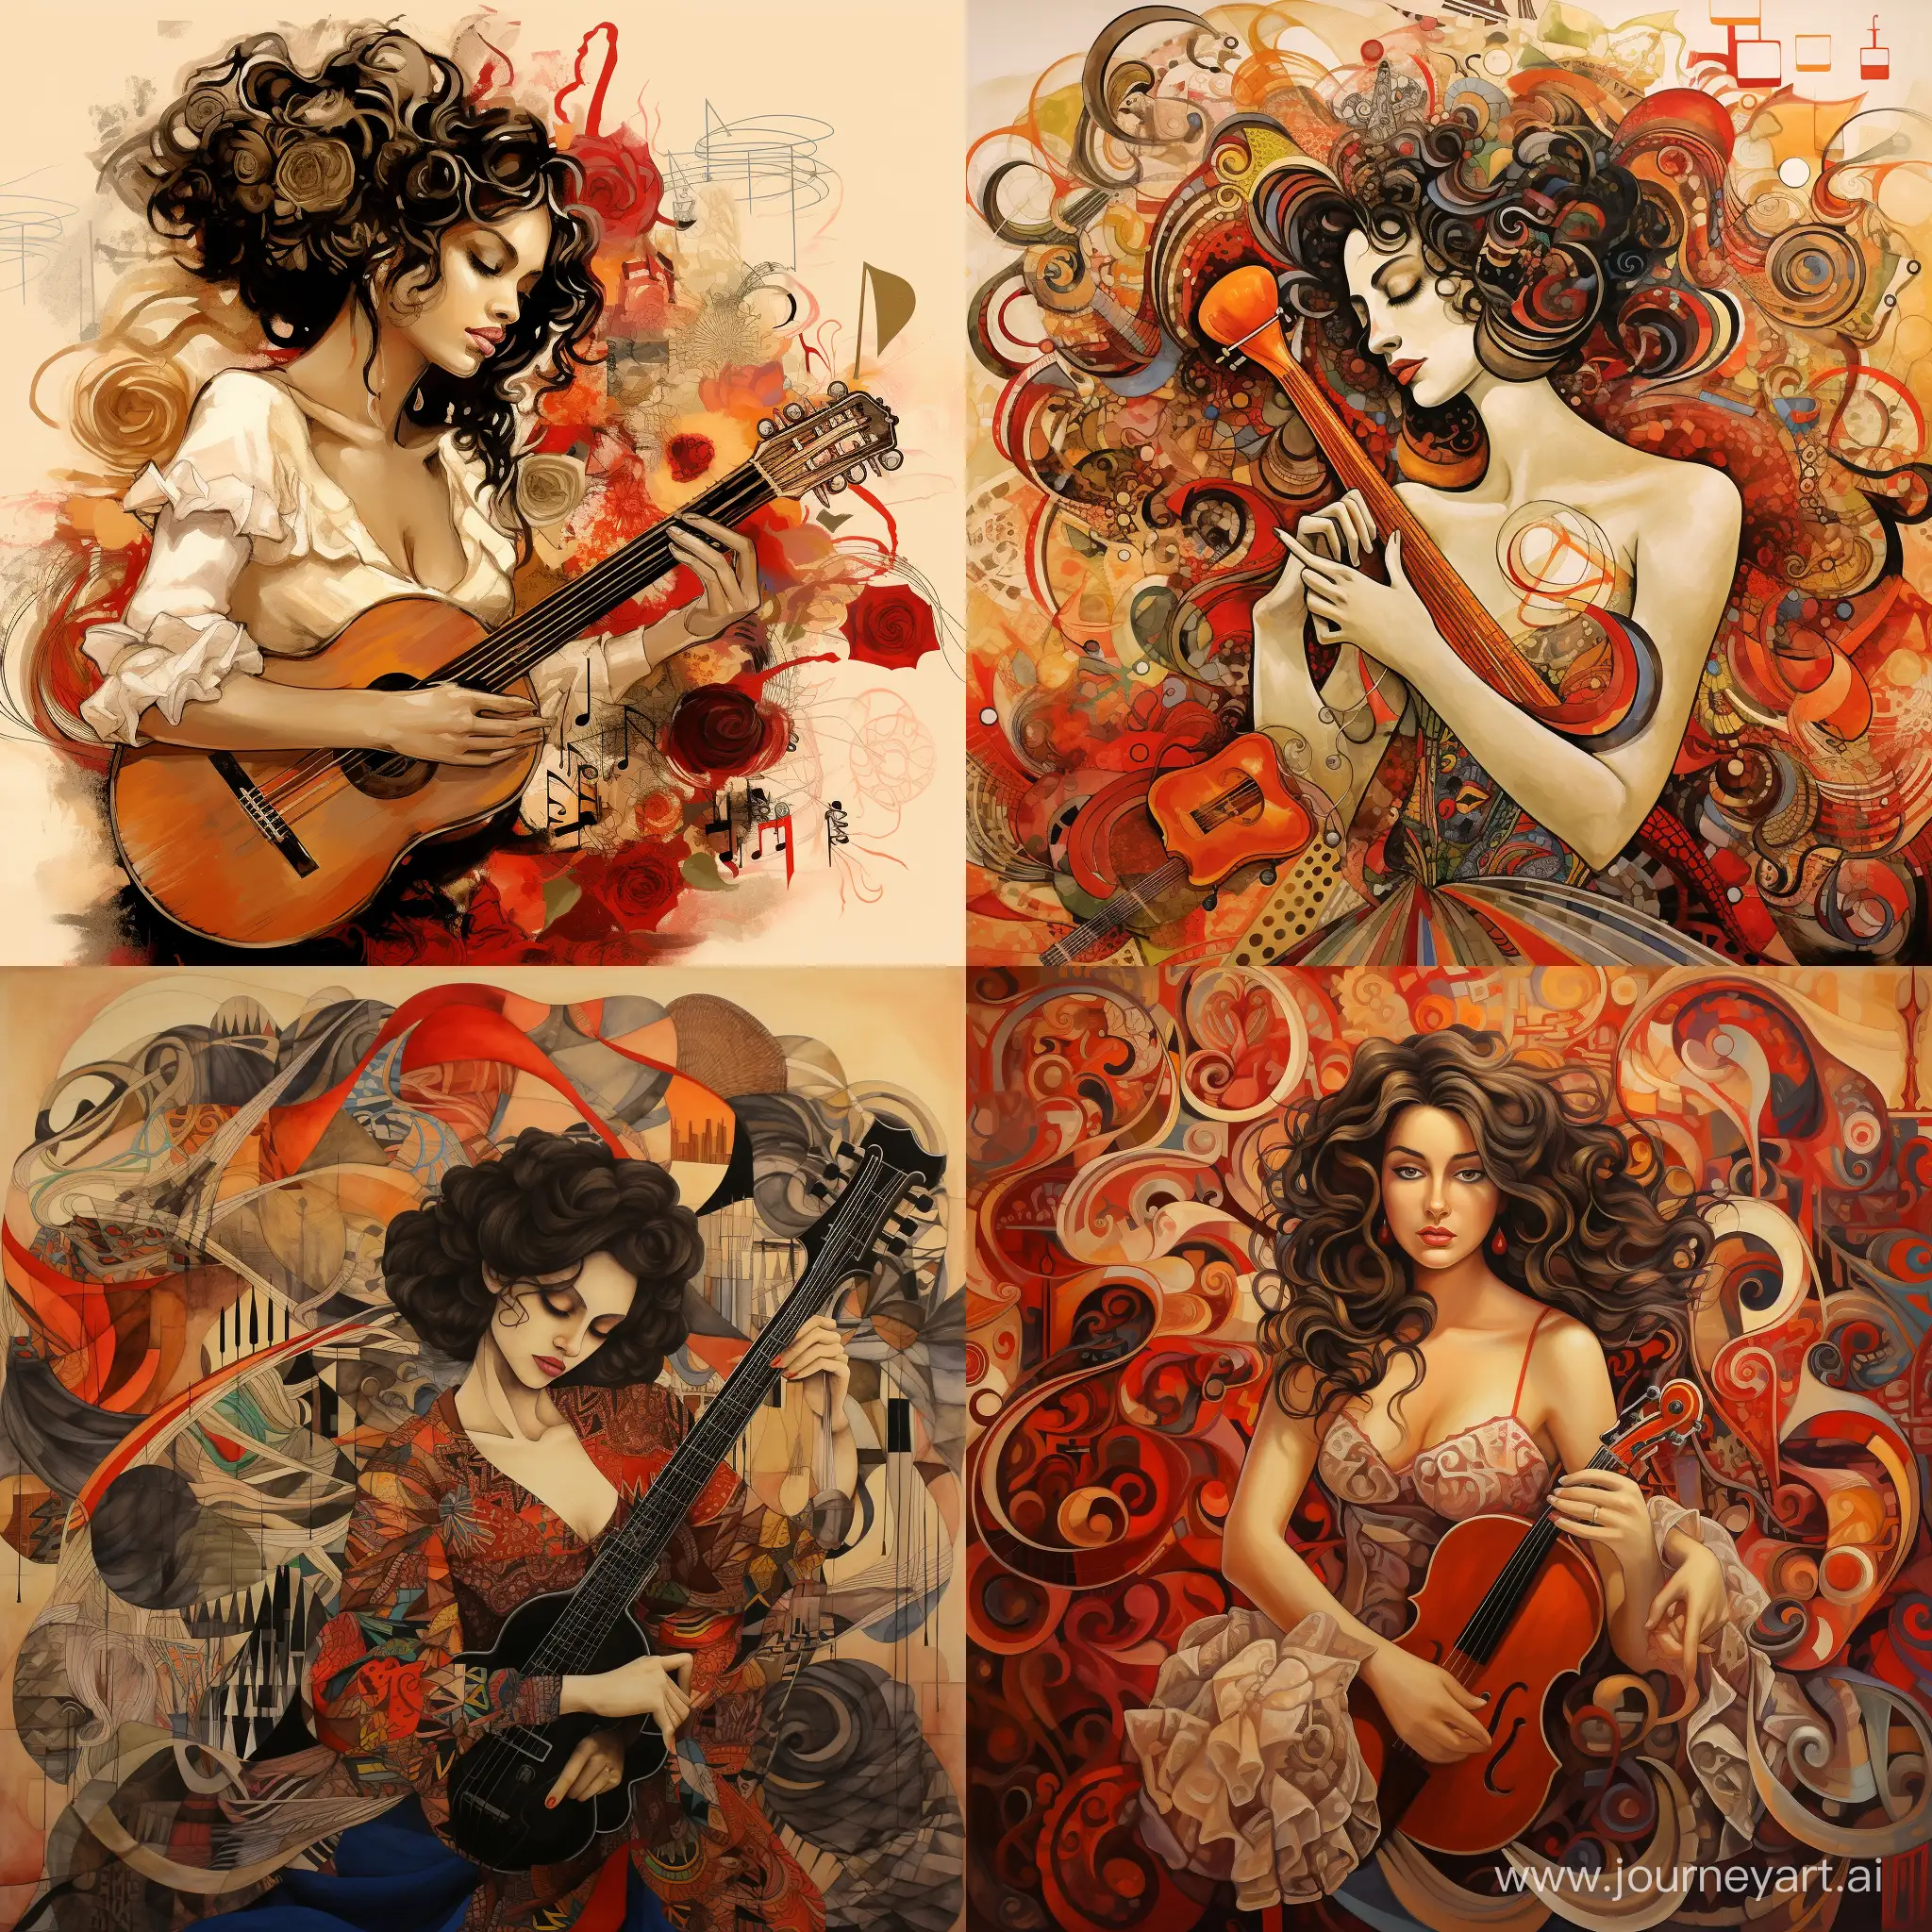 drawing of Spanish dancer woman and musical instruments like flute, french horn, violin as a background